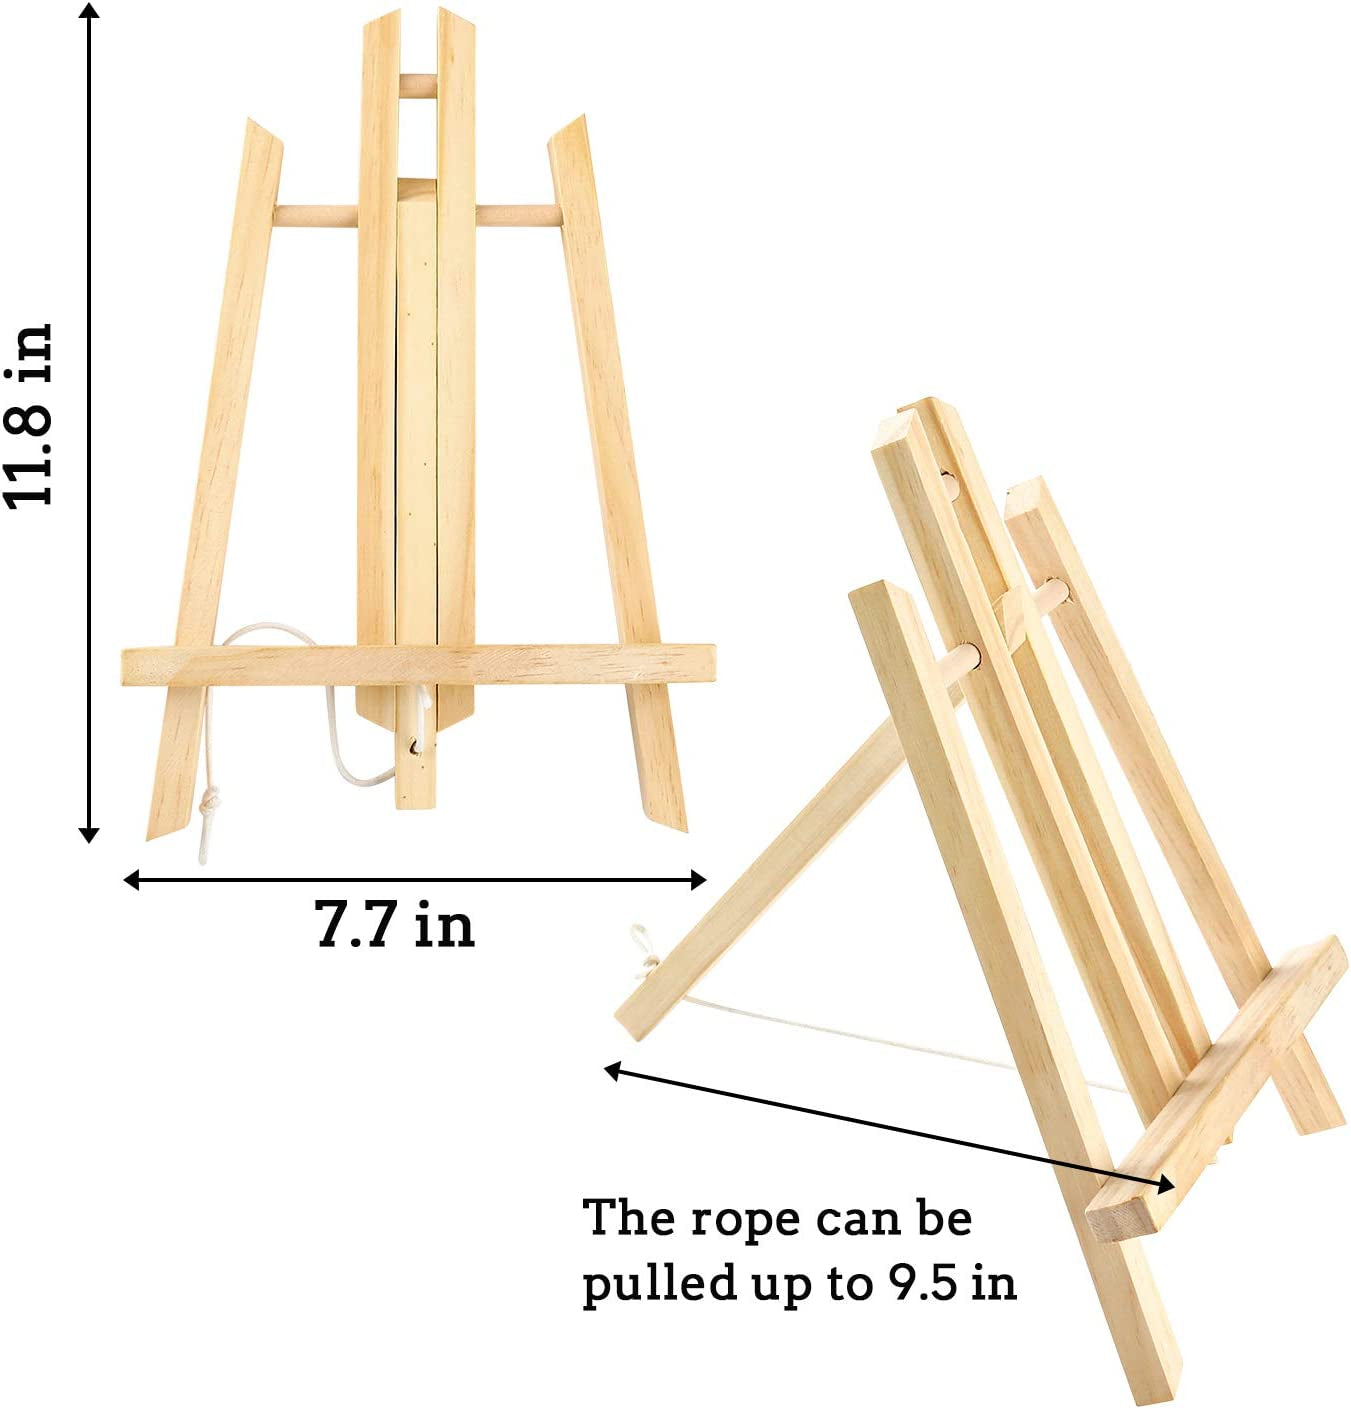 Wood Easels, Easel Stand for Painting Canvases, Art, and Crafts. (11.8 Inch, 4 Pack), Tripod, Painting Party Easel, Kids Student Table School Desktop, Portable Canvas Photo Picture Sign Holder